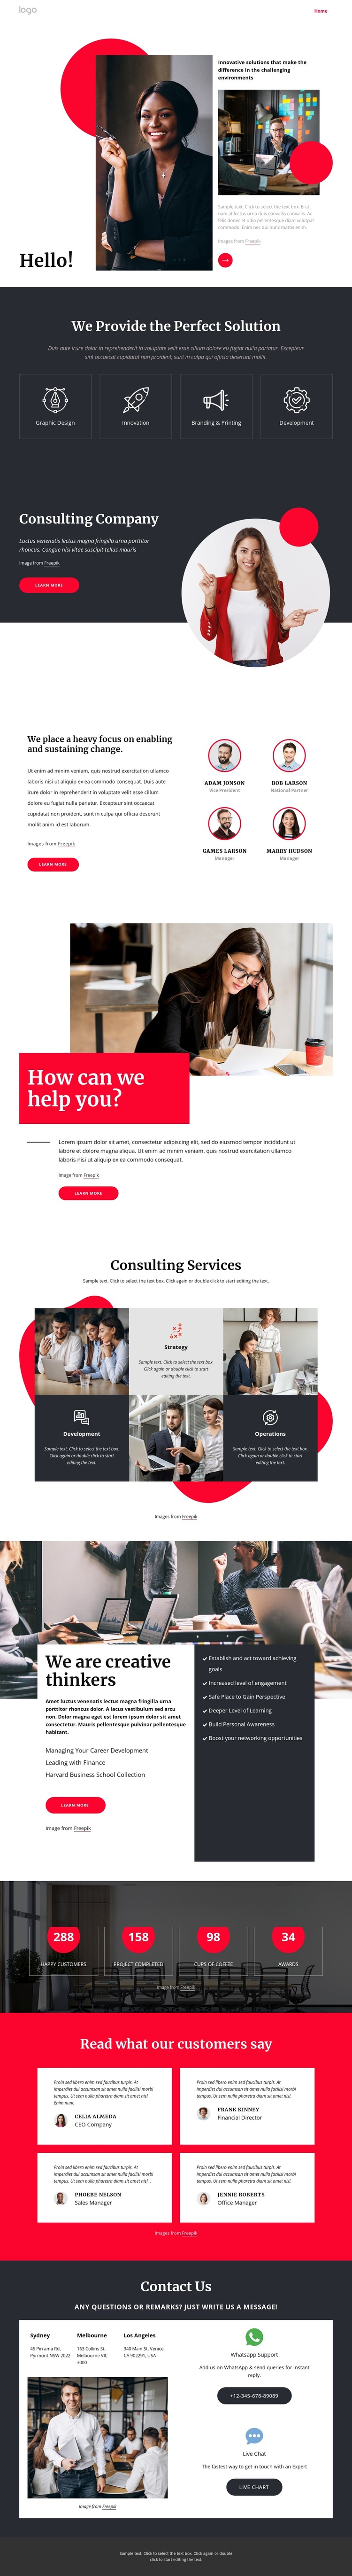 Consulting company NYC Template